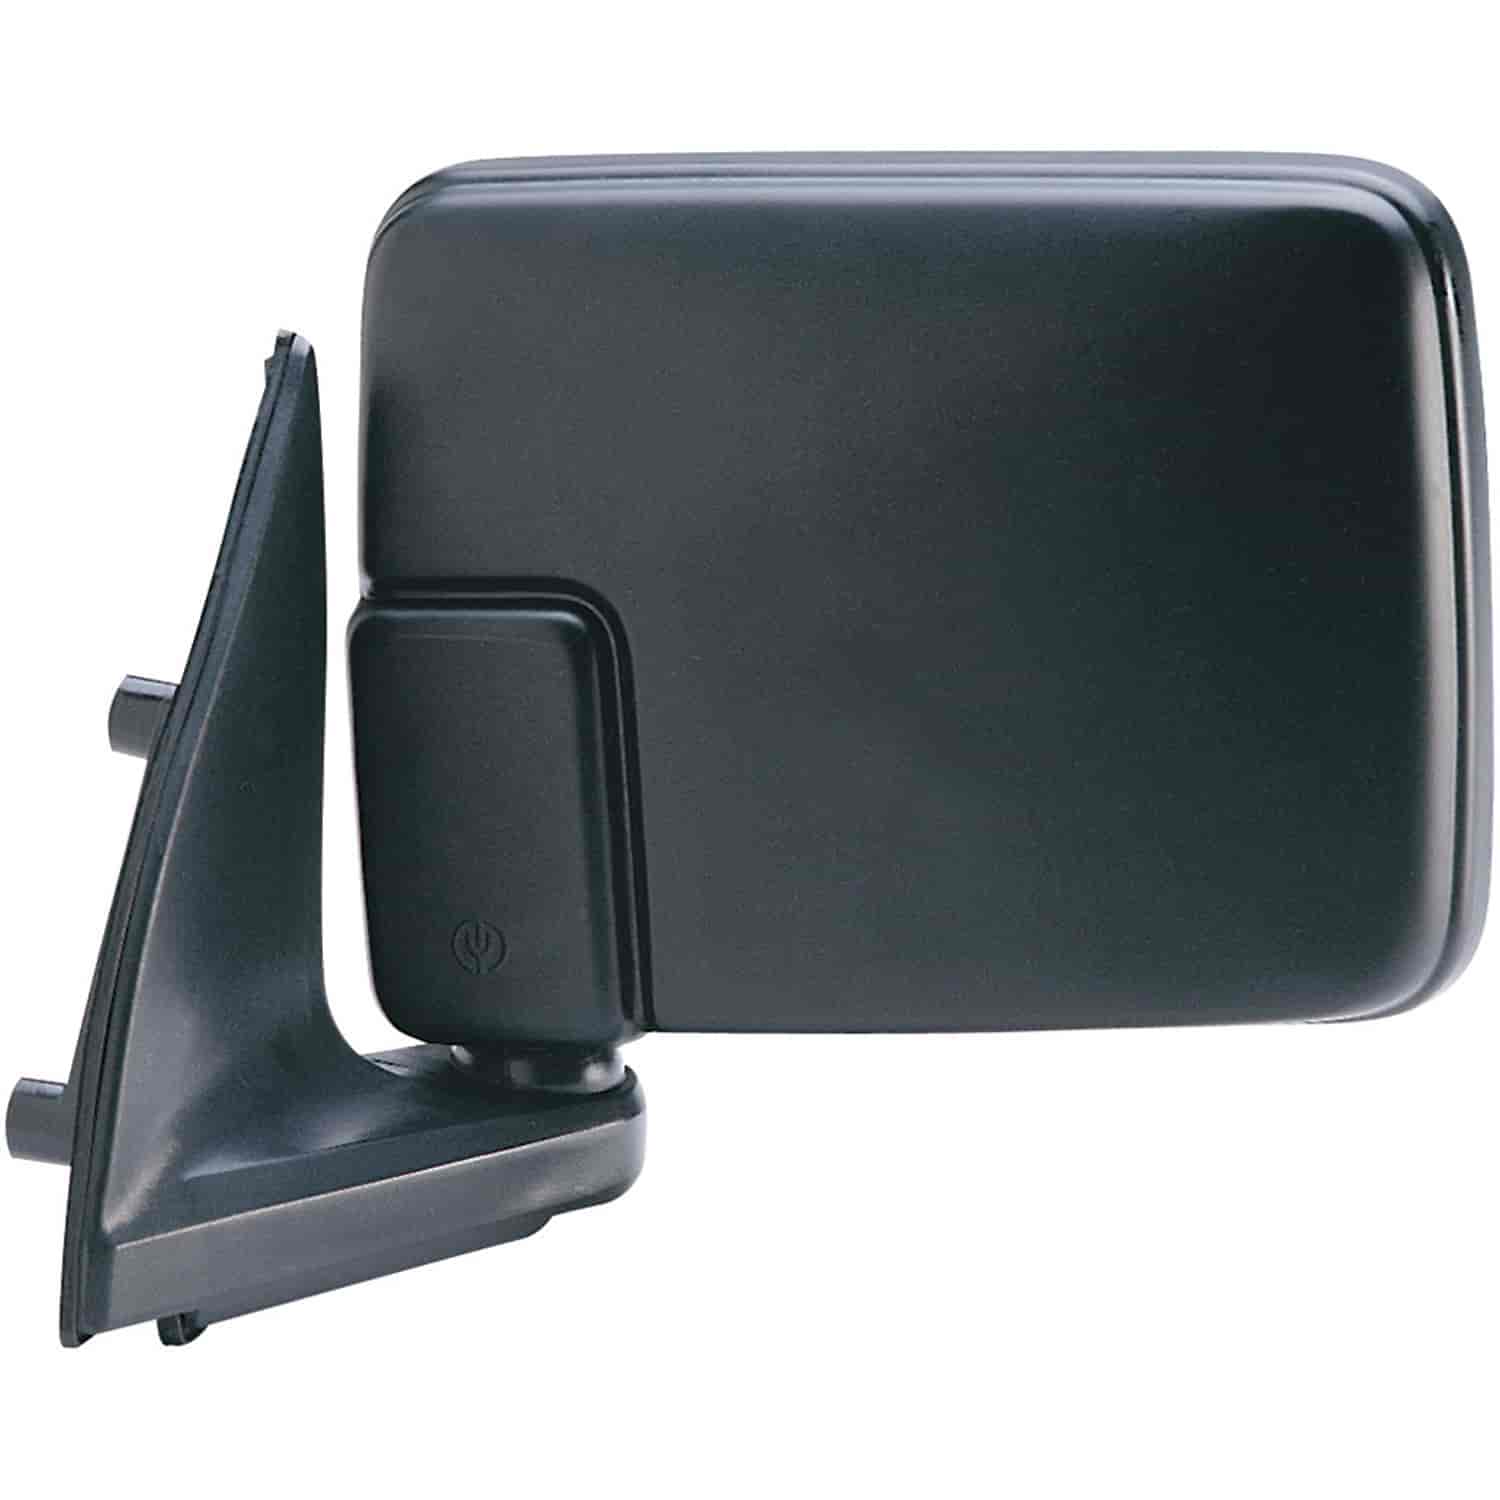 OEM Style Replacement mirror for 87-96 Dodge D50 Pick-Up; Mitsubishi Pick-Up driver side mirror test